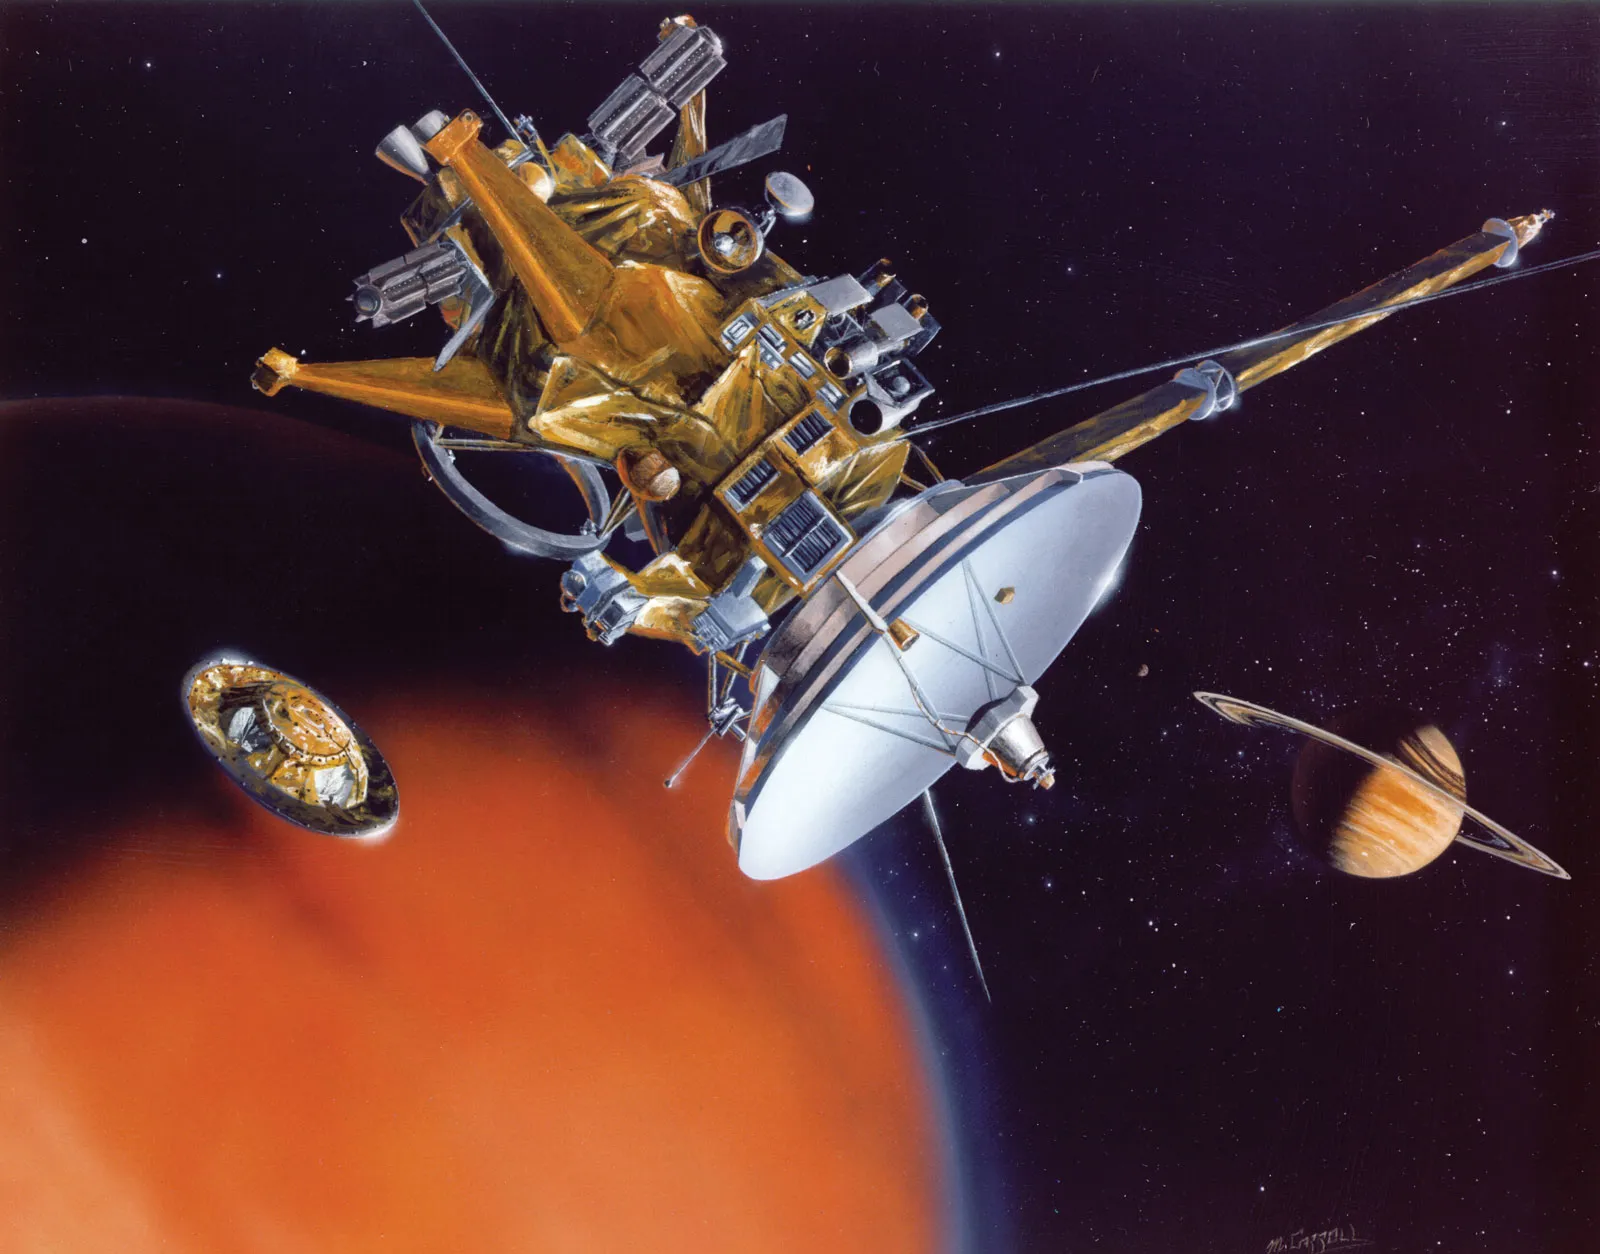 An artist's conception of the Huygens probe separating from the Cassini orbiter and beginning its descent into the atmosphere of Titan